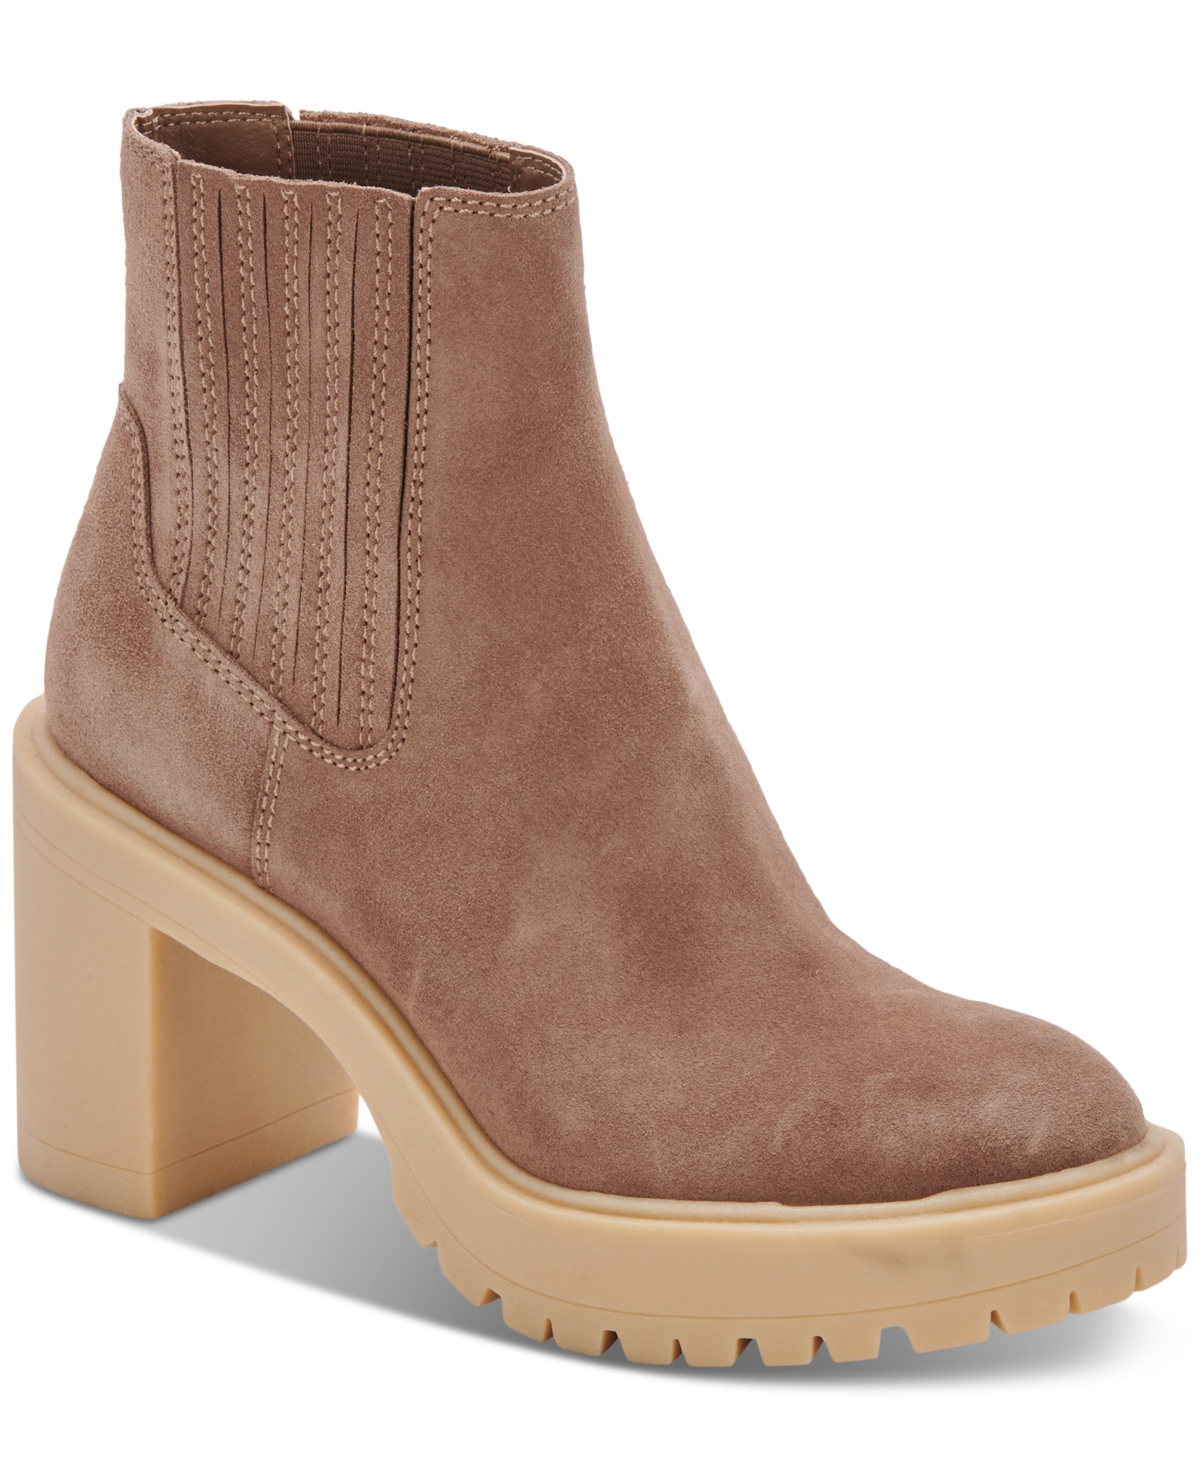 DOLCE VITA WOMEN'S CASTER H2O LUG SOLE CHESLEA HEELED BOOTIES